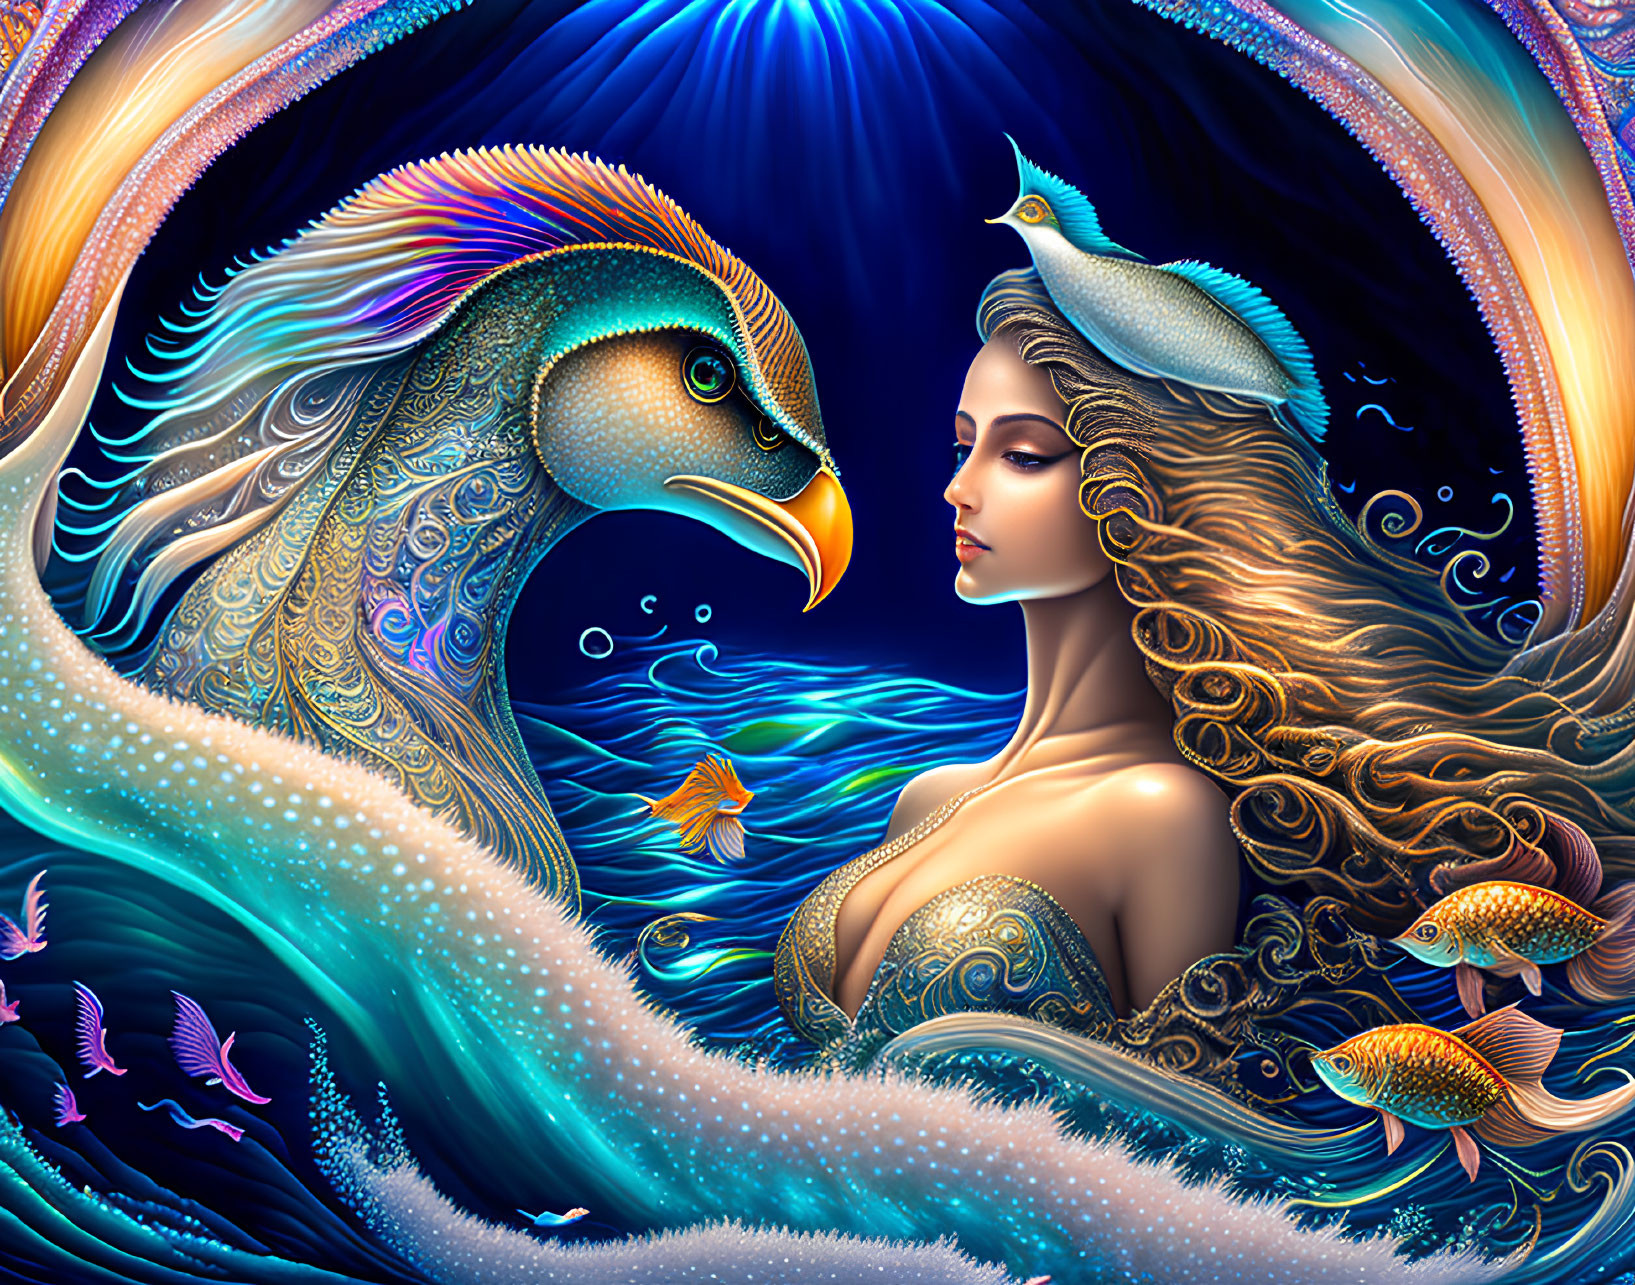 Illustration of woman with peacock in cosmic background.